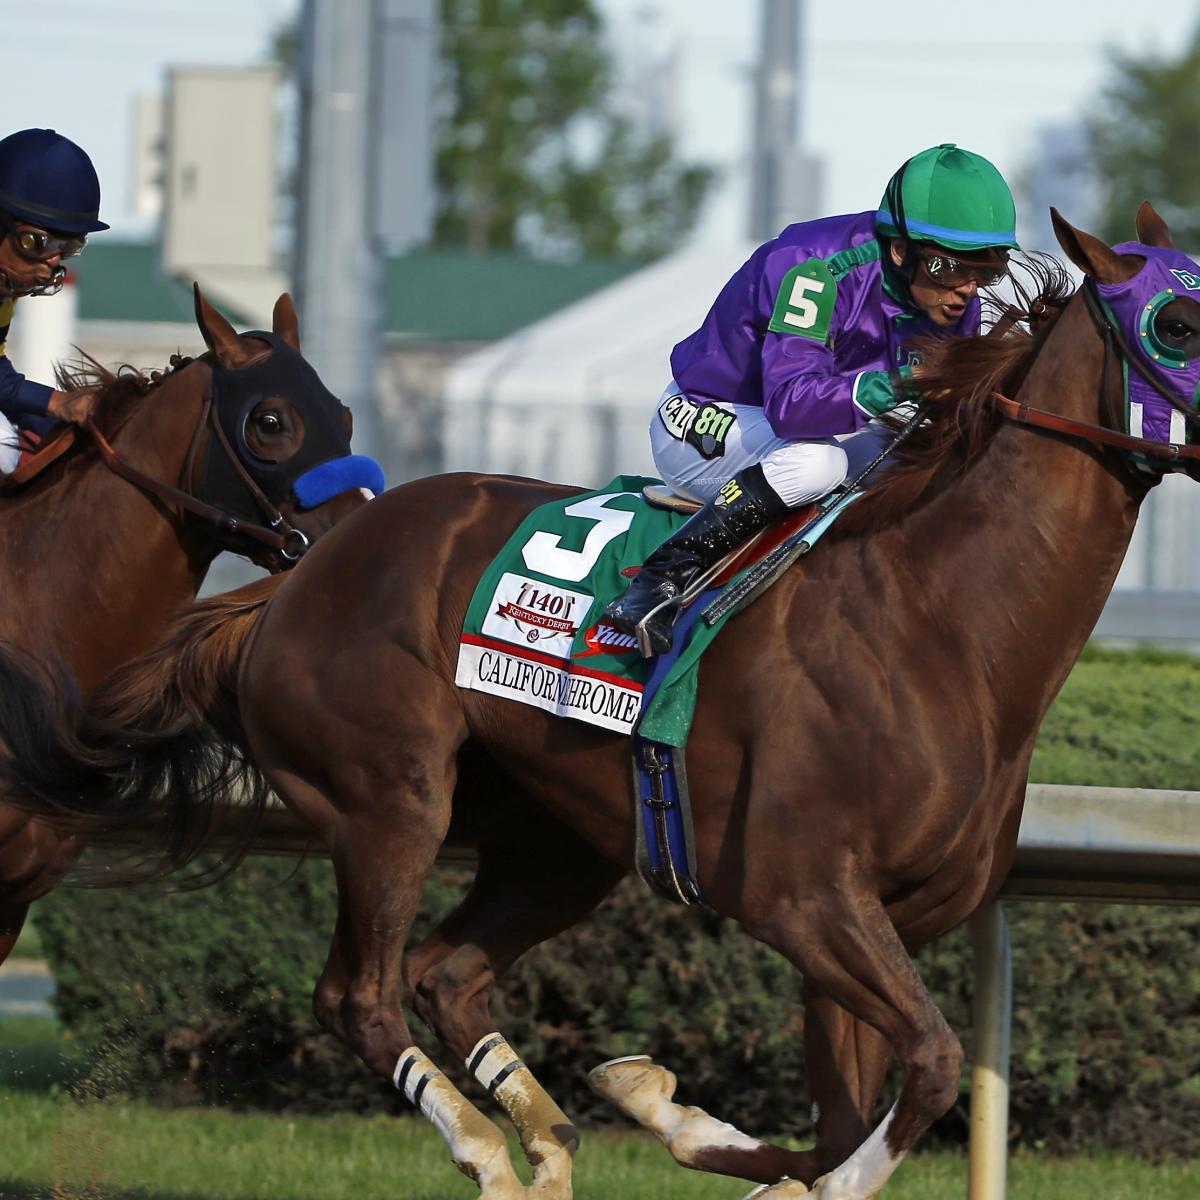 Kentucky Derby 2014 Race Replay, Highlights Analysis and Prize Money